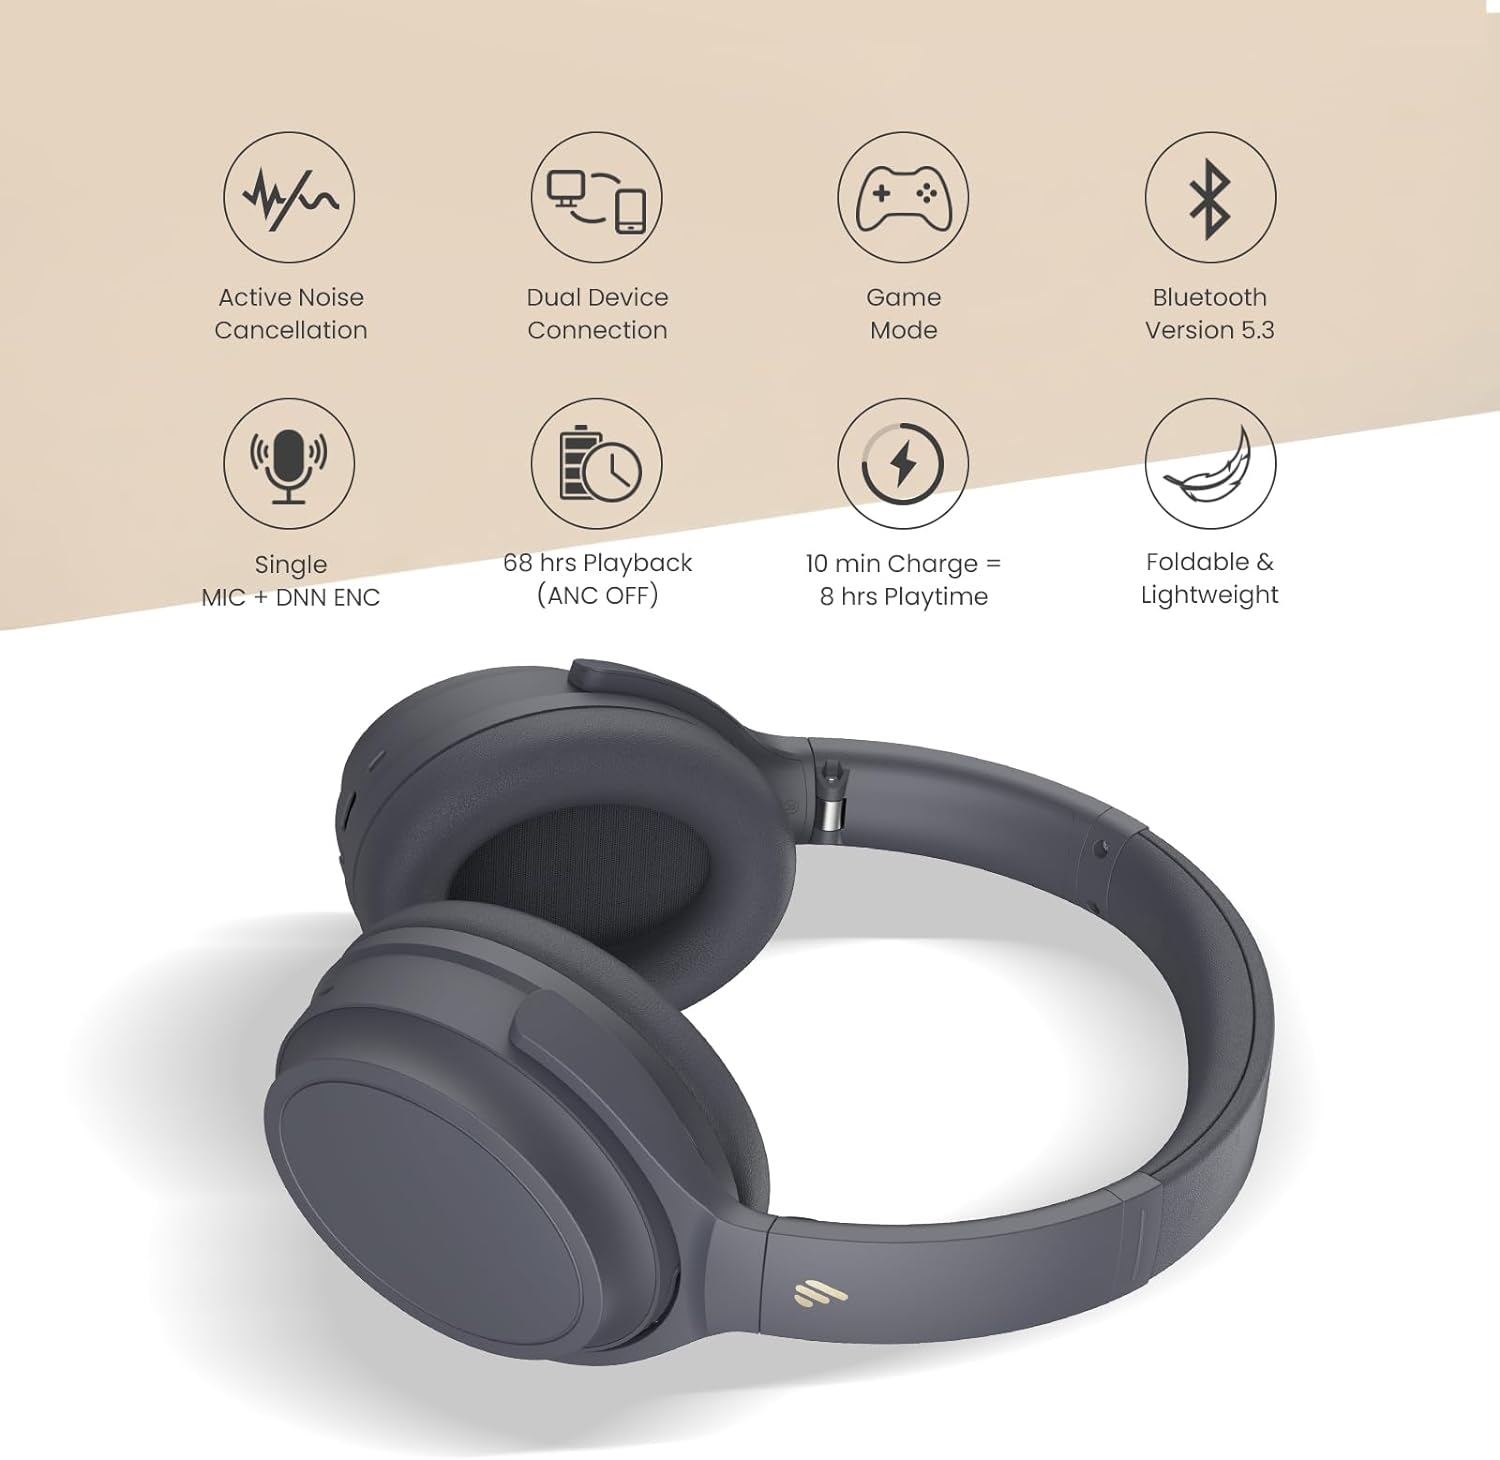 Edifier WH700NB Wireless Active Noise Cancellation Over-Ear Headphones, Bluetooth 5.3 Foldable Lightweight Headset, Dual Device Connection, 68-Hour Battery Life, for Travel, Home Office - Black